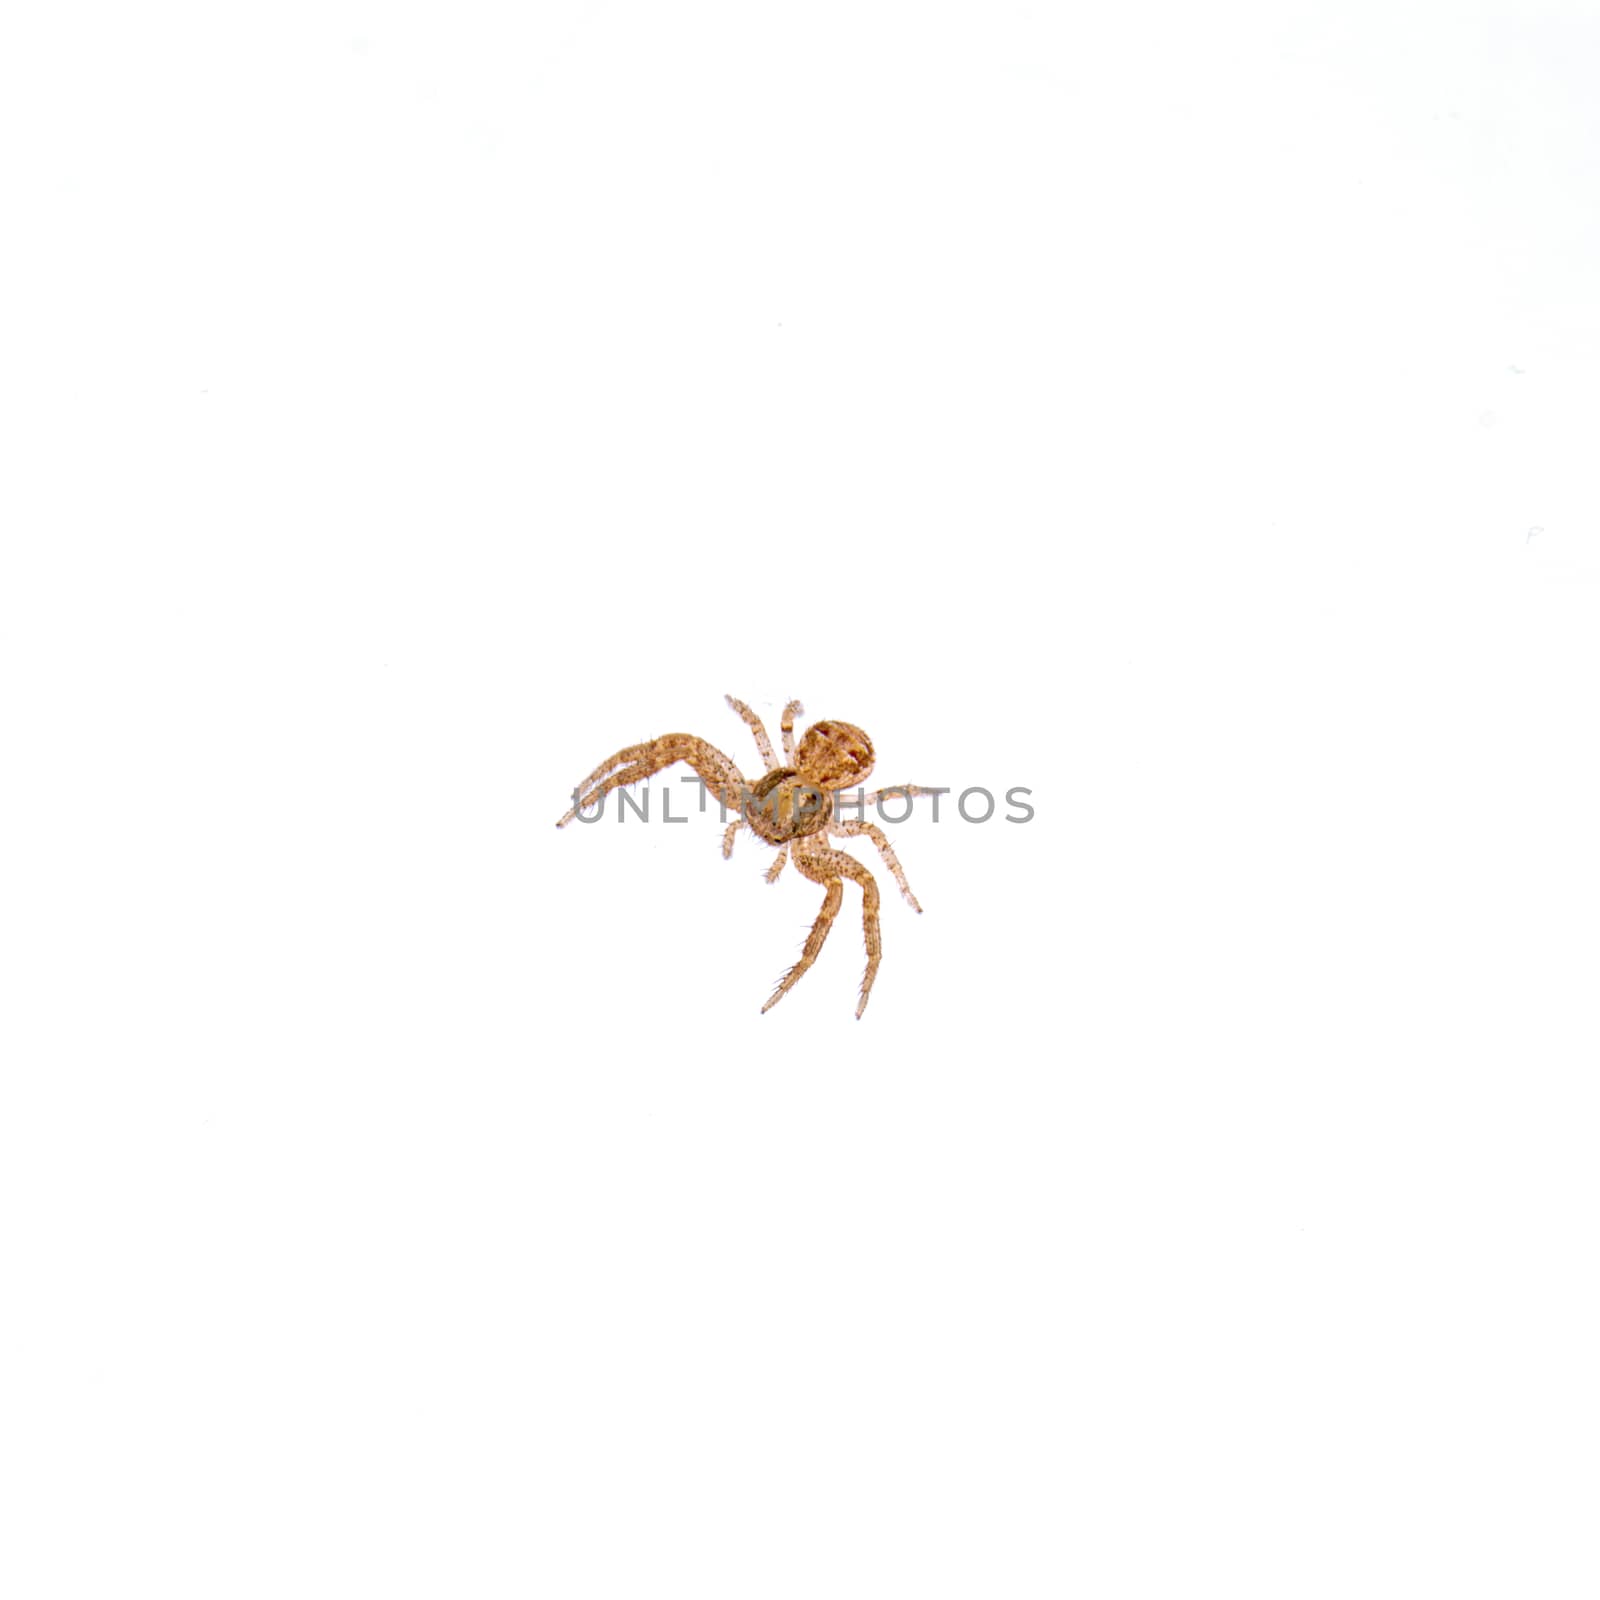 Small spider isolated on a white background